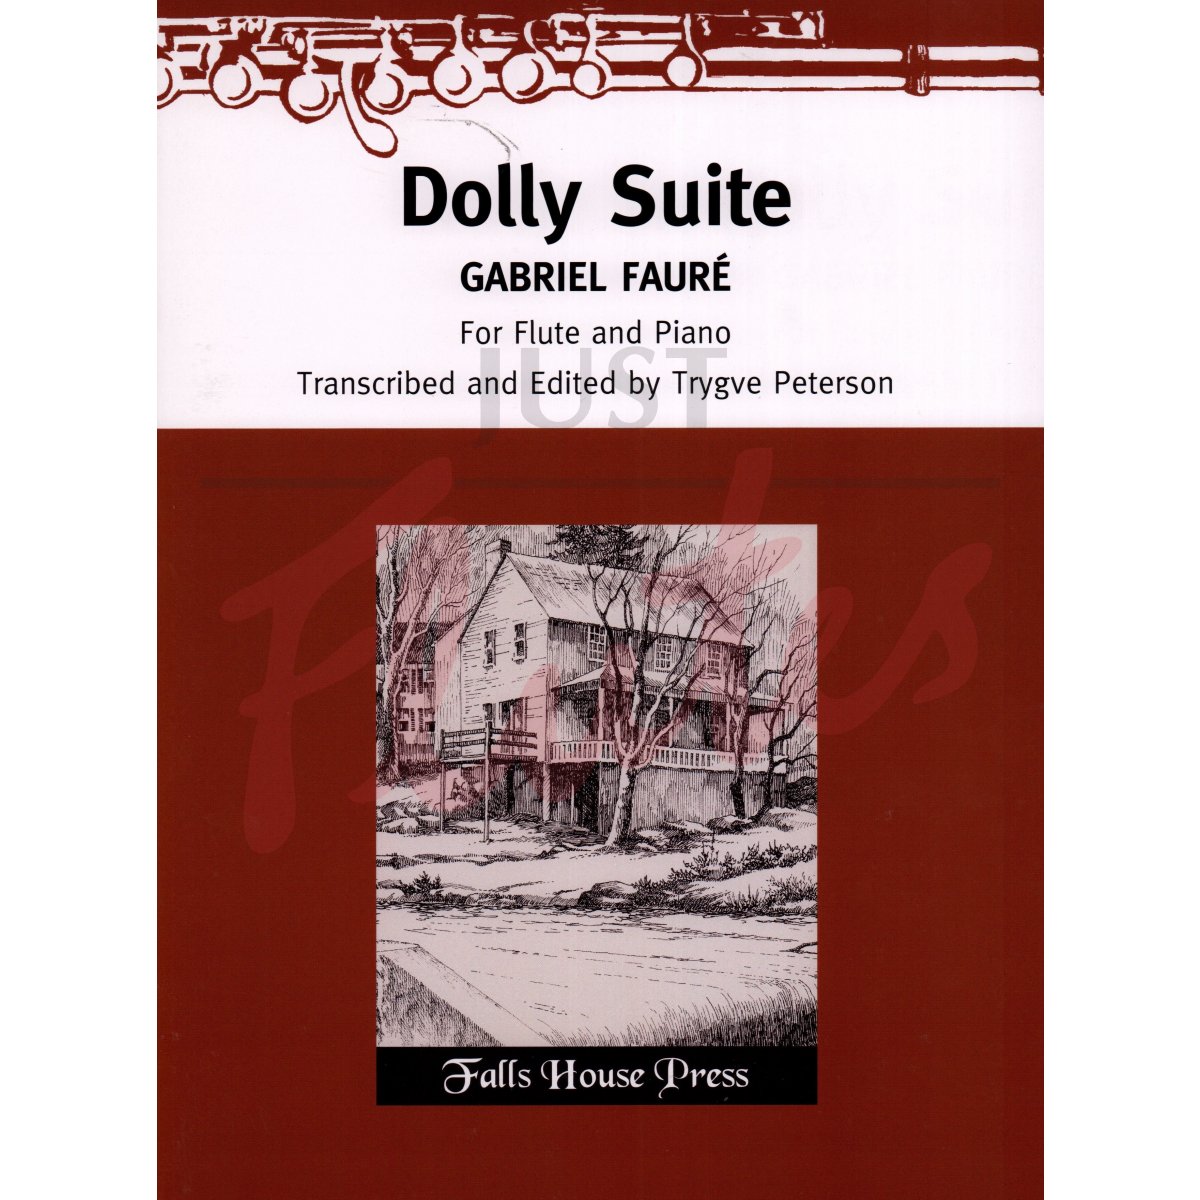 Dolly Suite for Flute and Piano